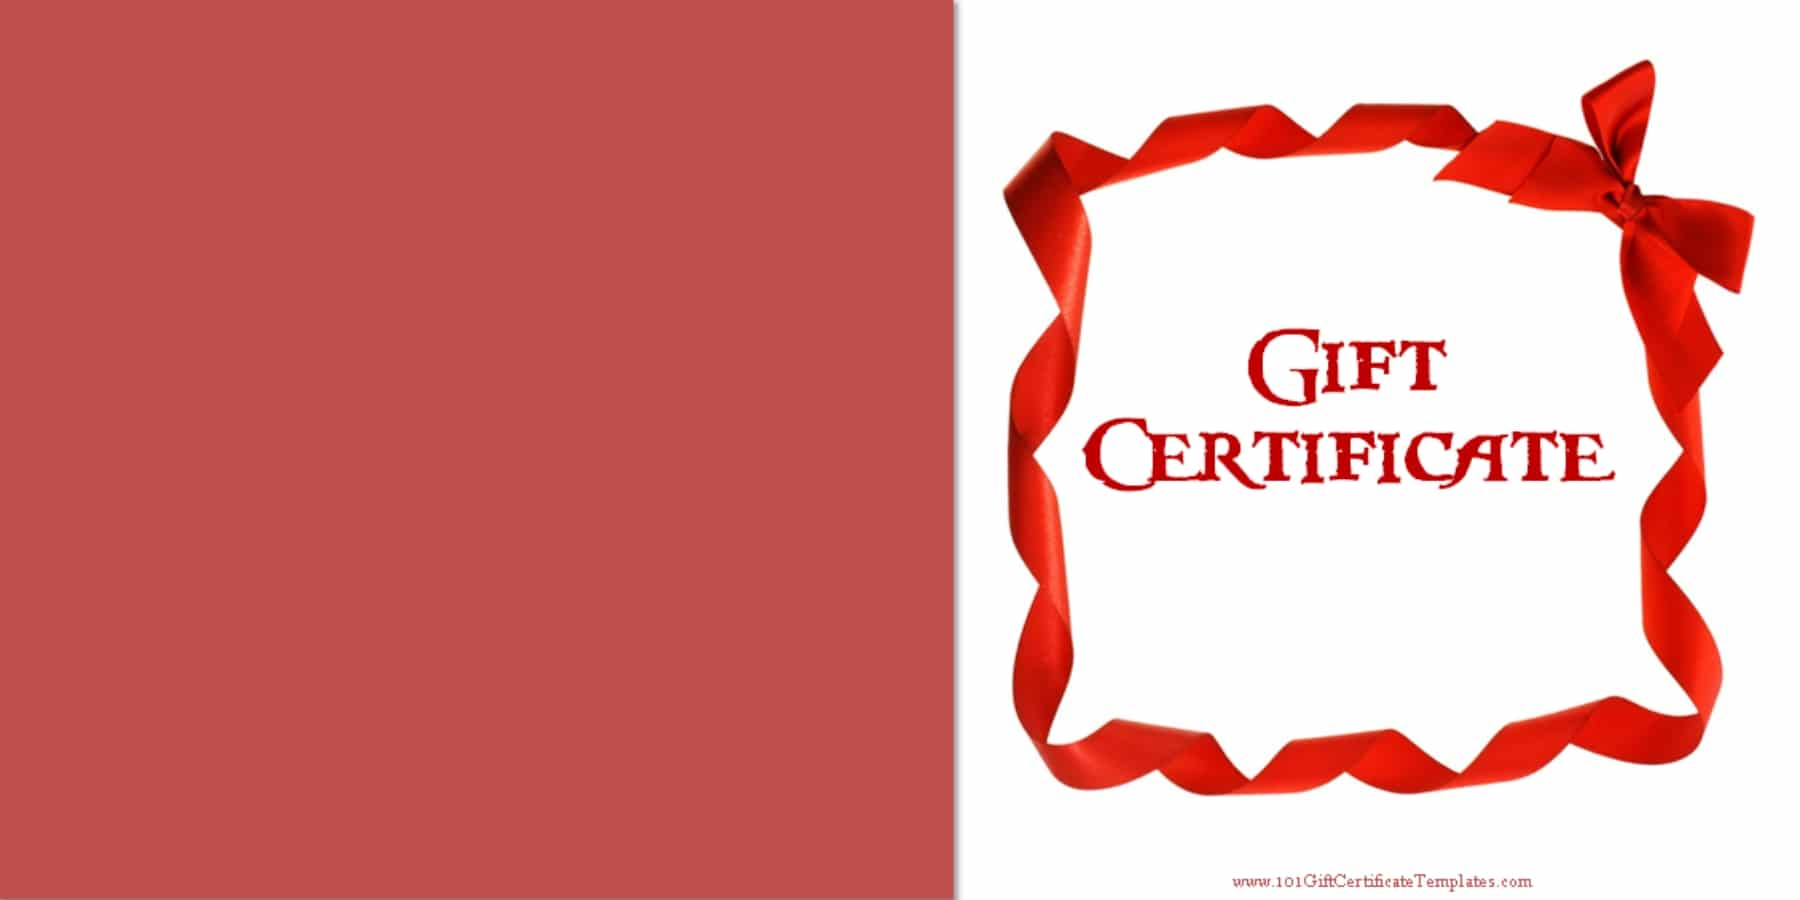 Printable Gift Certificate Templates - Free Printable Gift Vouchers Uk